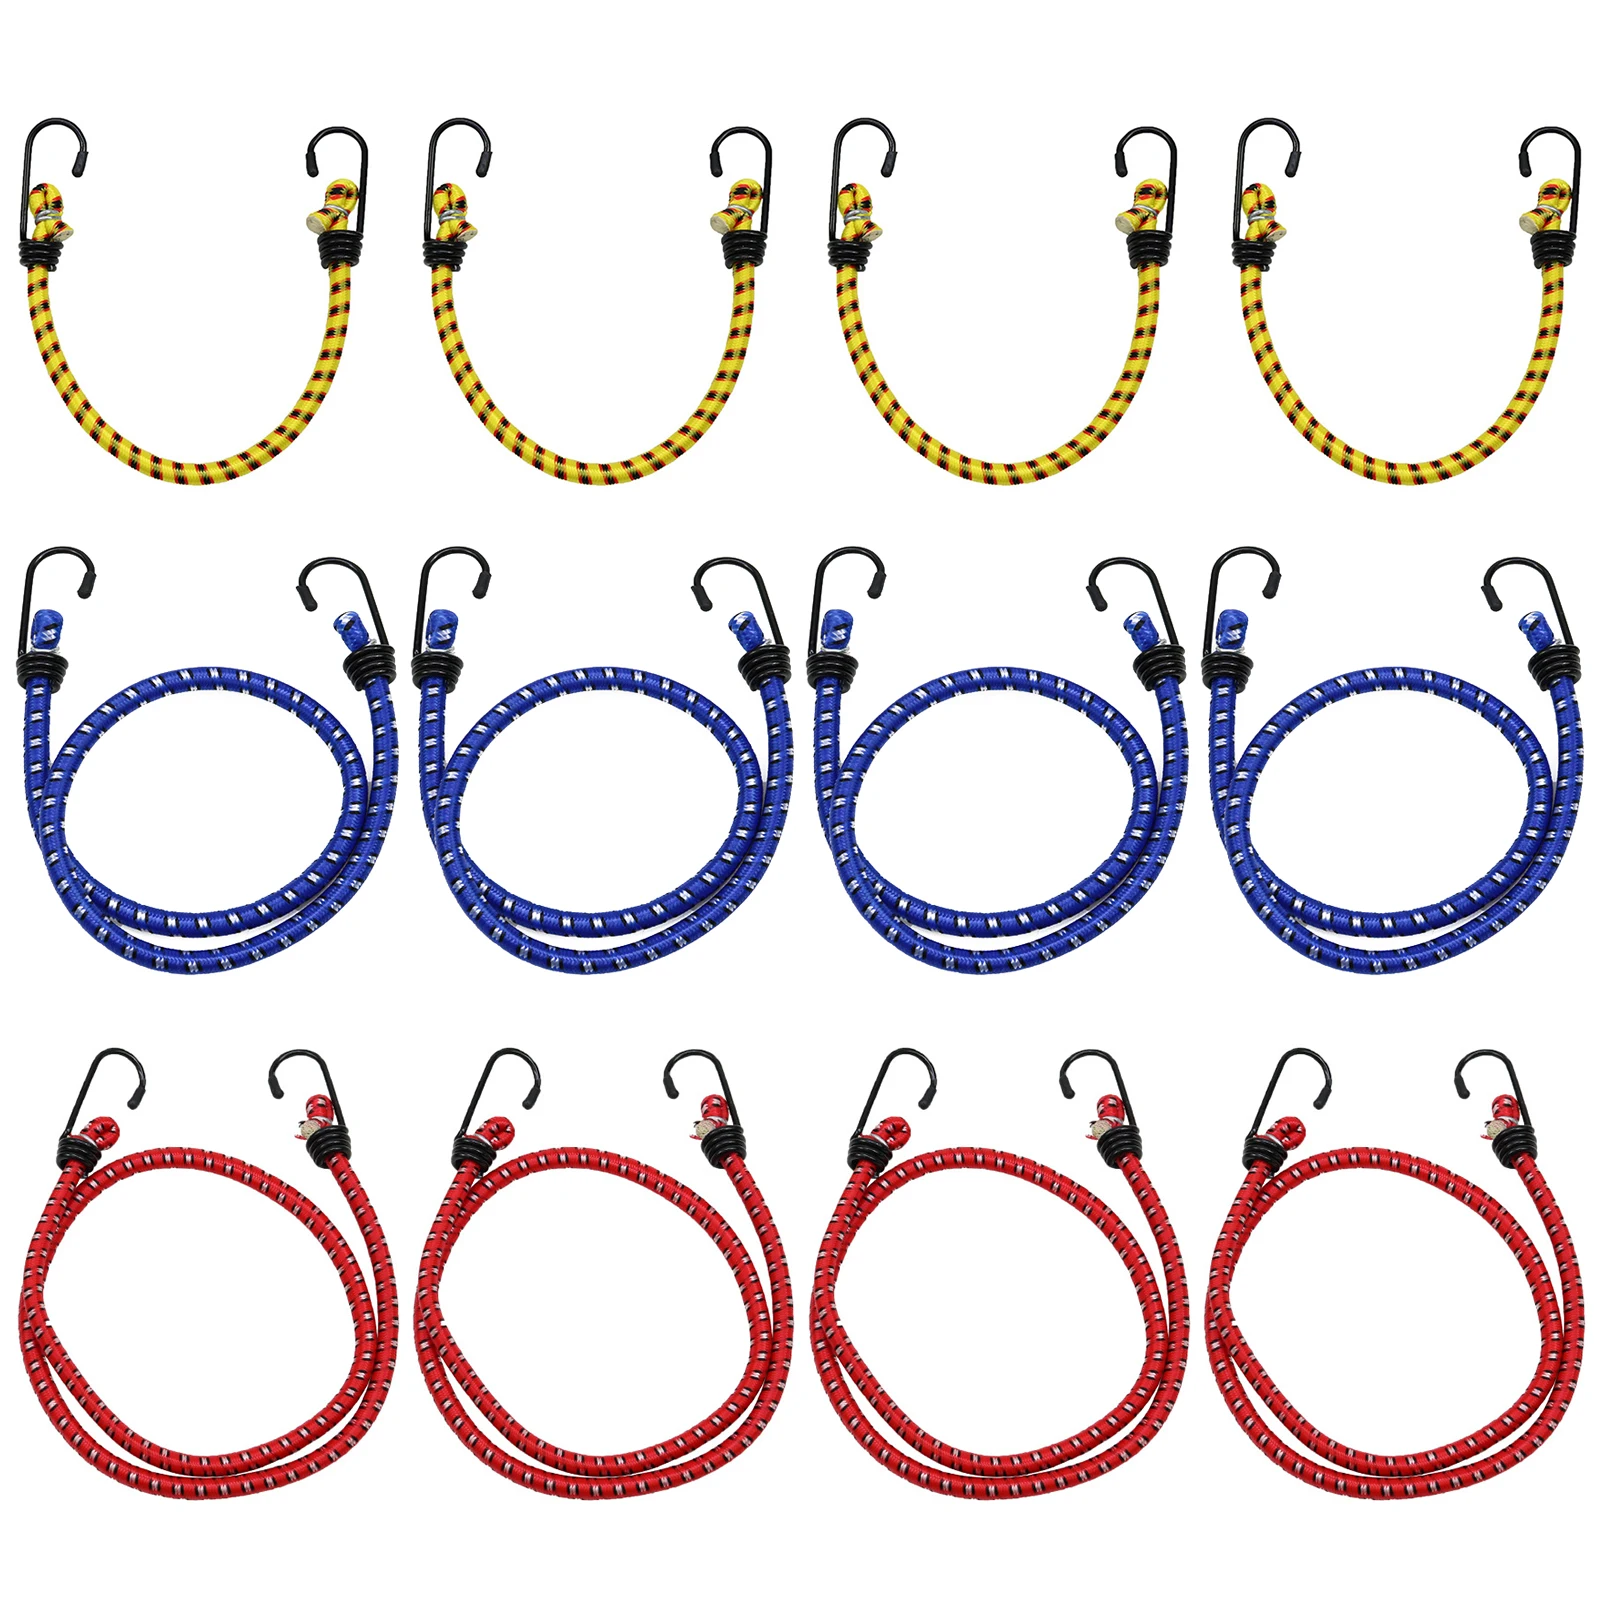 

12pcs Elastic Straps With Hooks Bicycle Bungee Cord Strong Heavy Duty Bundling Tents Reusable Outdoor Camping For Securing Tarps